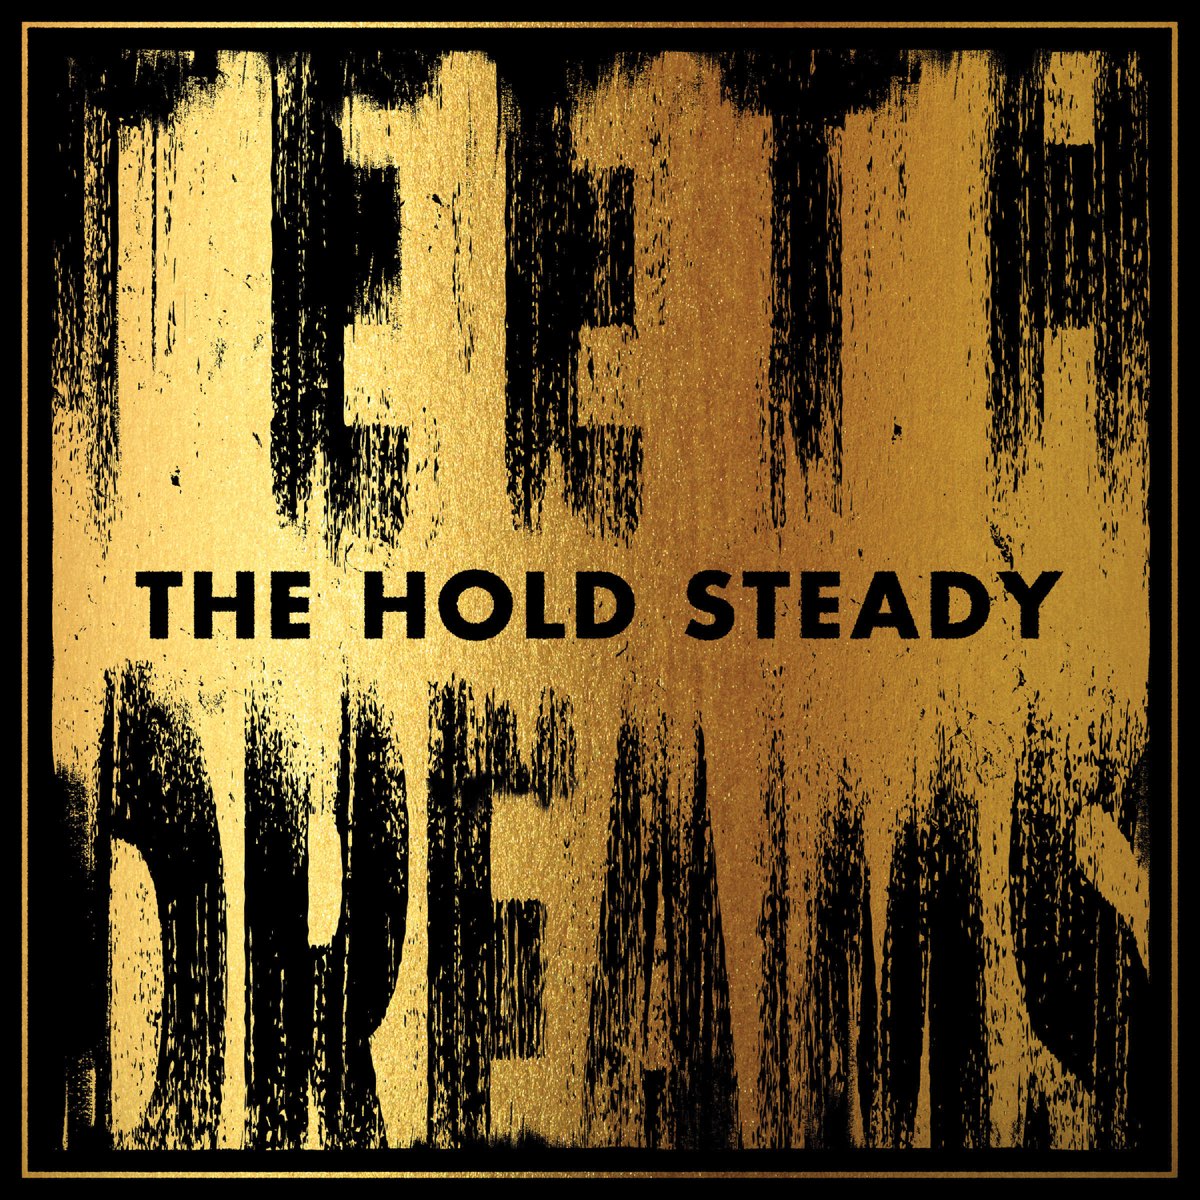 10 years ago today, #theHoldSteady released “Teeth Dreams.” Waking up with that American sadness. Read our @theholdsteady (@steadycraig, @tadkubler) cover story from that year: magnetmagazine.com/2014/09/26/the…